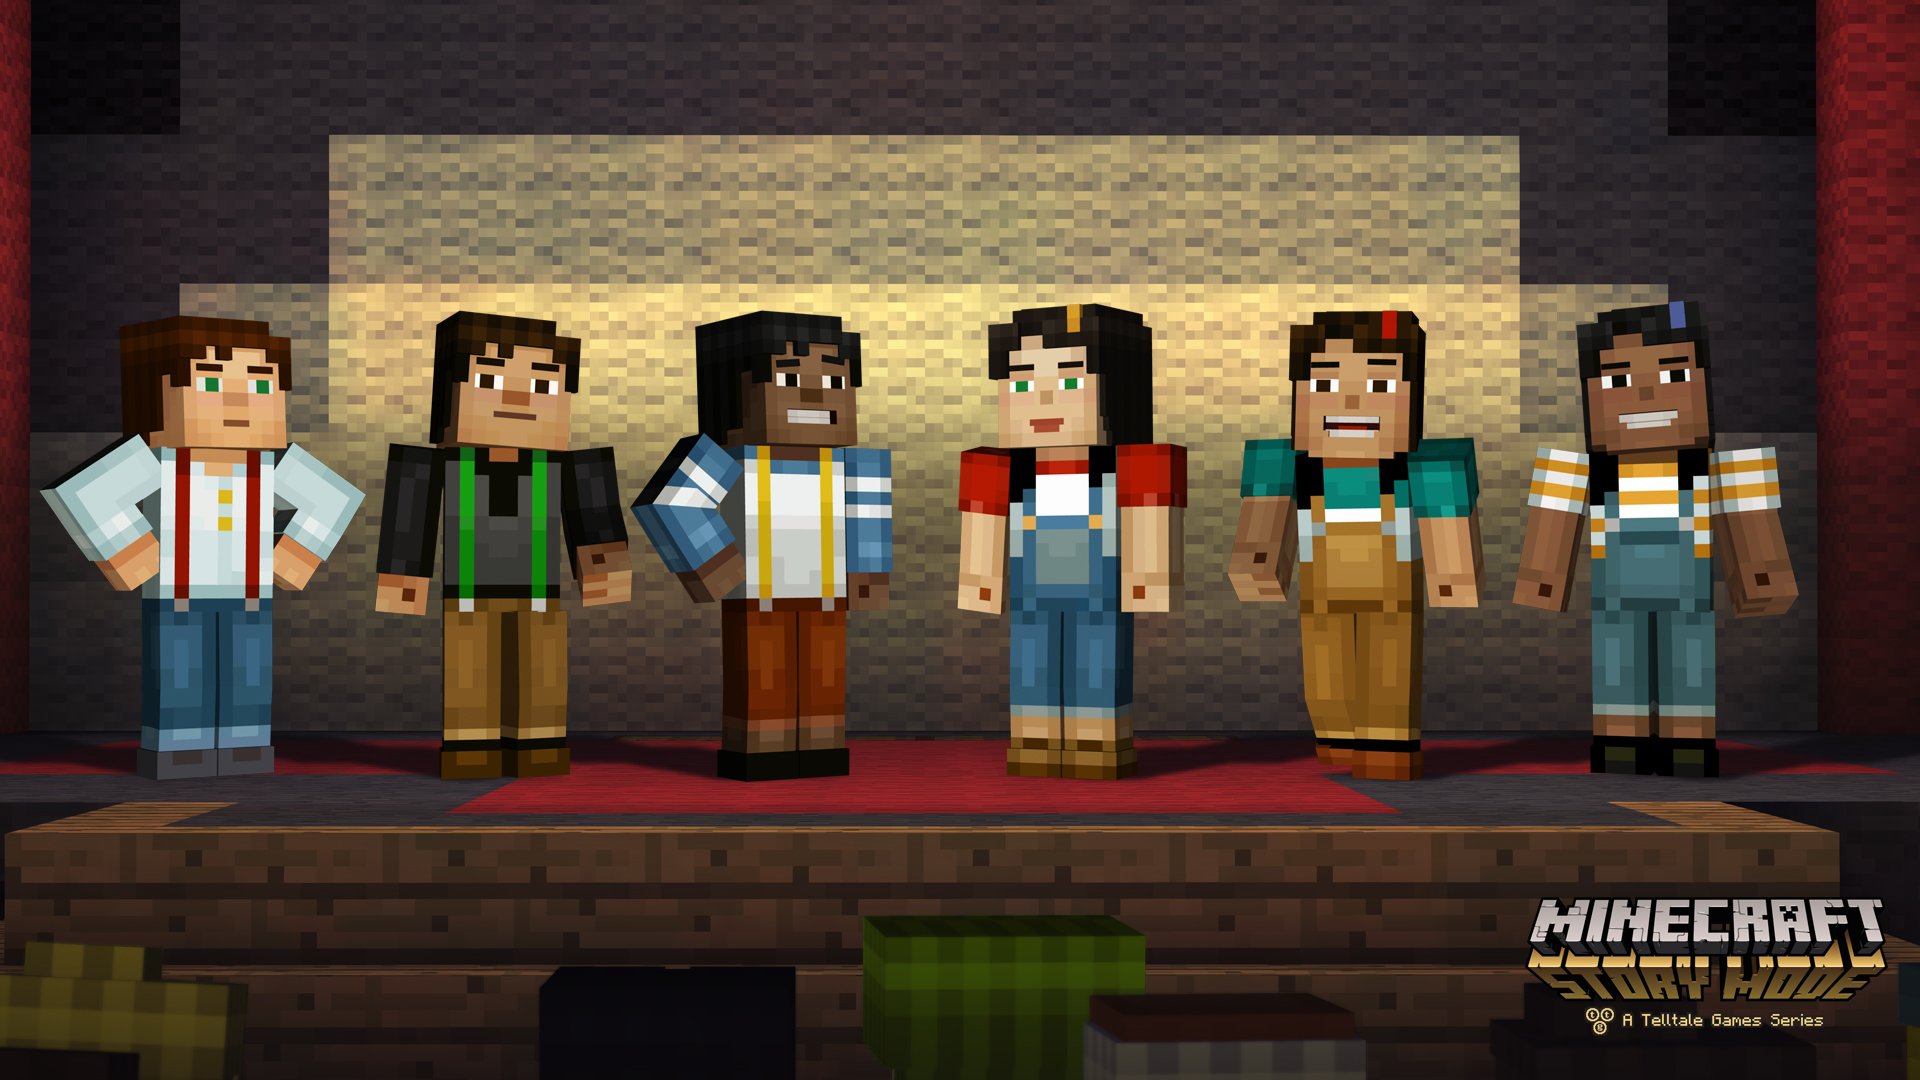 Minecraft Story Mode A Telltale Games Series Launches On Xbox One And Xbox 360 Thexboxhub